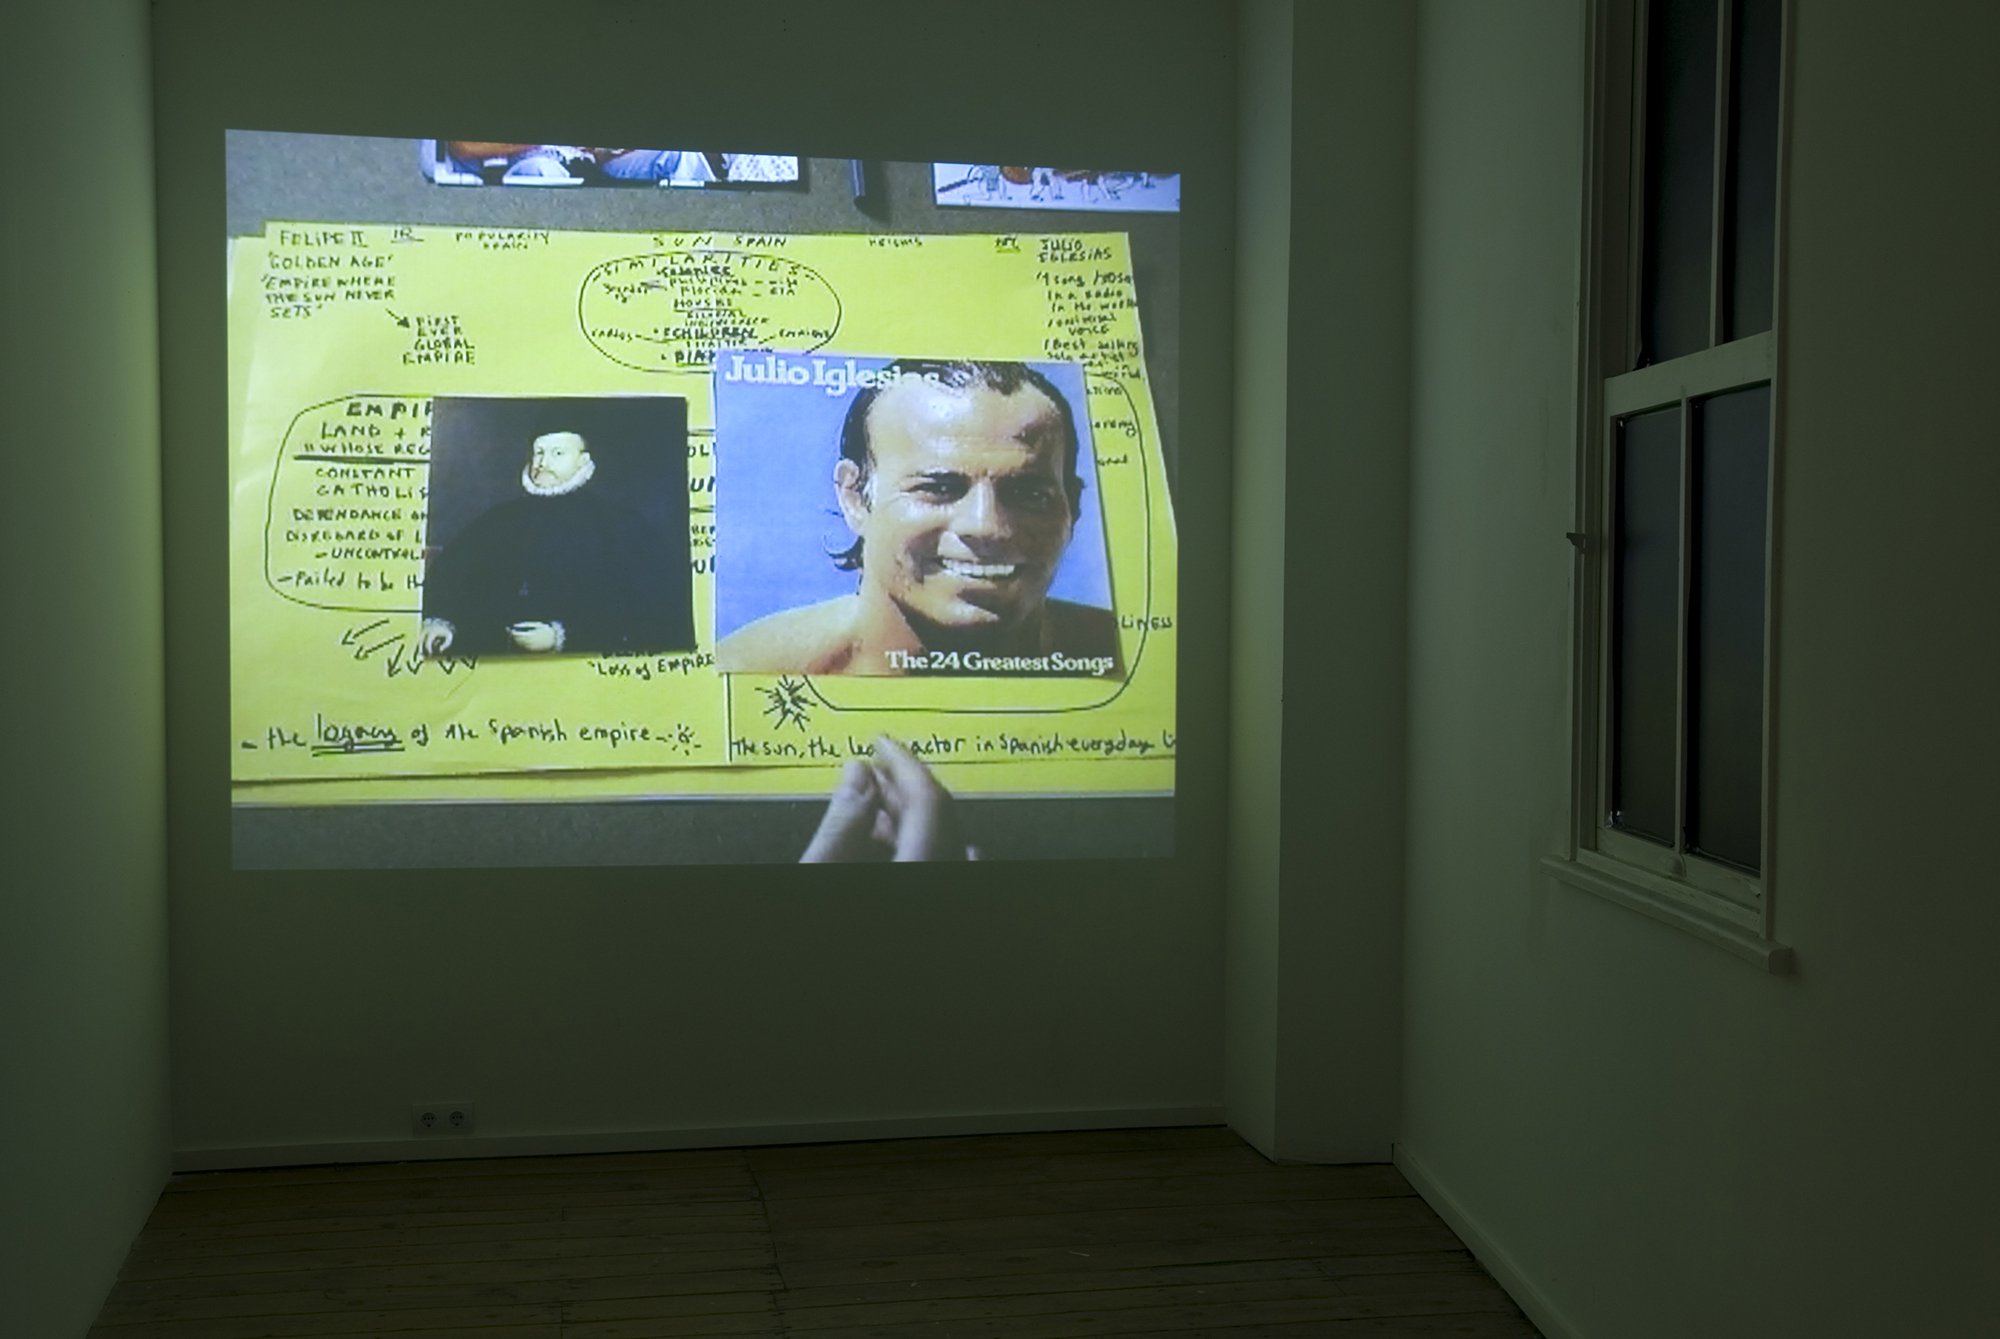 Patricia Esquivias, Folklore II, video, 2007. Installation view, Until I Find You / Folklore I&amp;II, Rodeo, Istanbul, 2008 – 2009